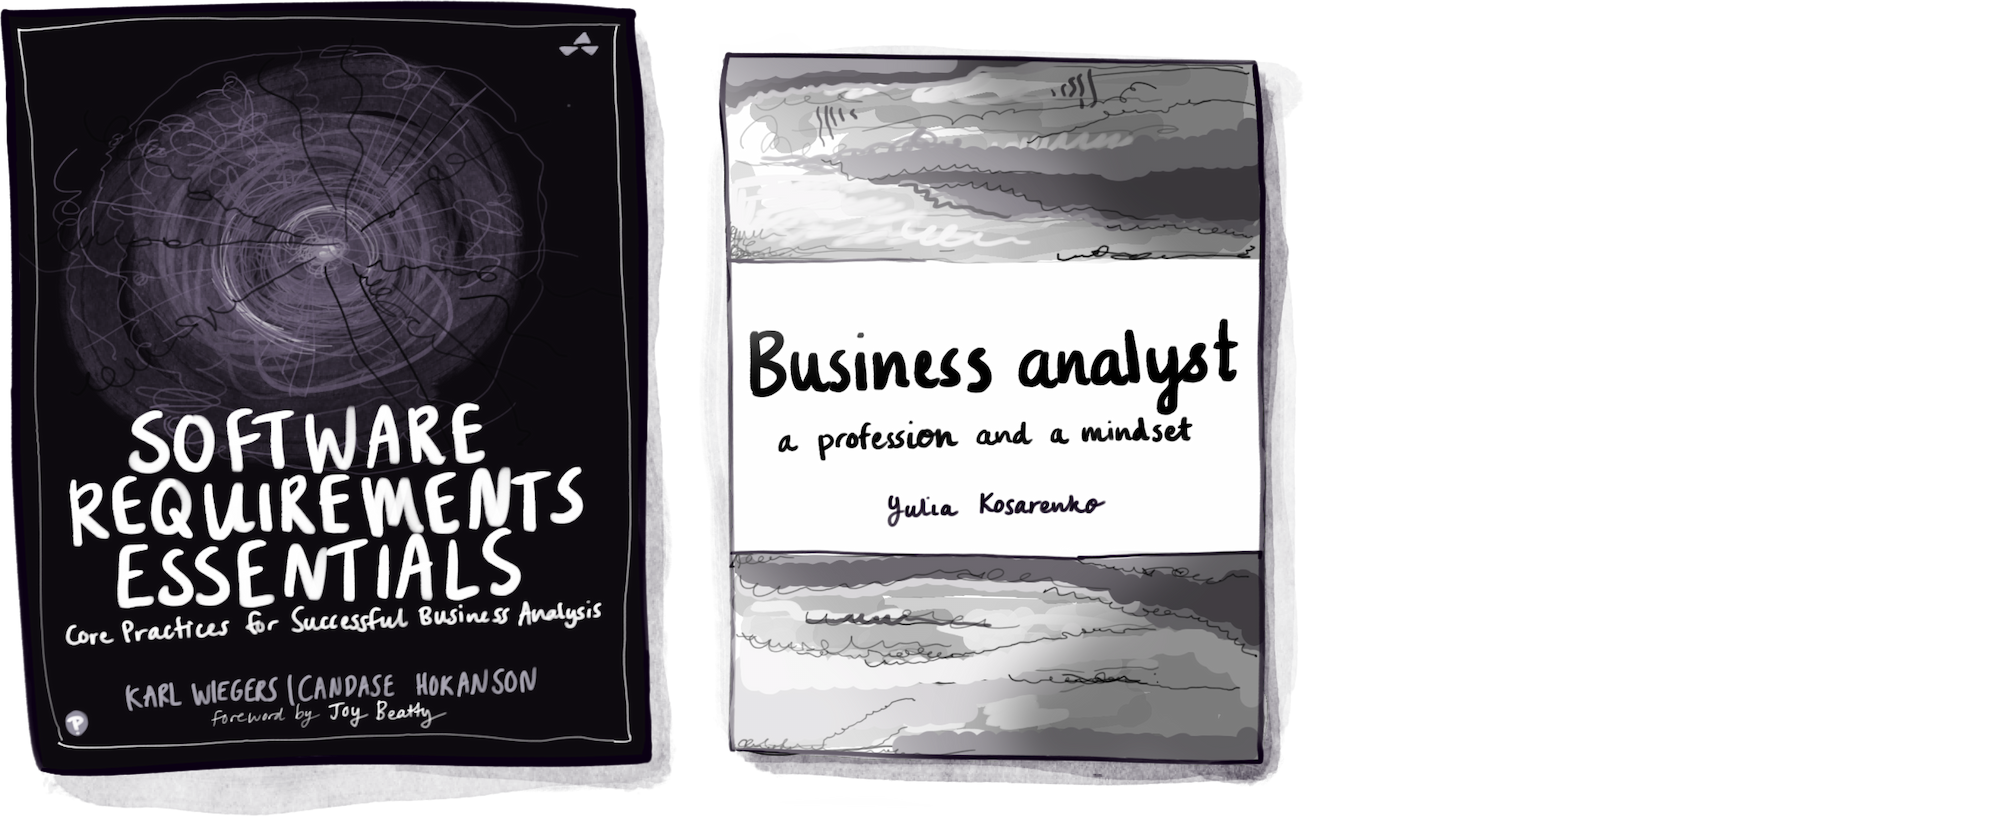 Business analysis books for the Jimmy book club list including Software
requirements essentials by Karl Wiegers and Candase Hokanson, and Business
Analyst: A profession and a Mindset by Julia Kosarenko.